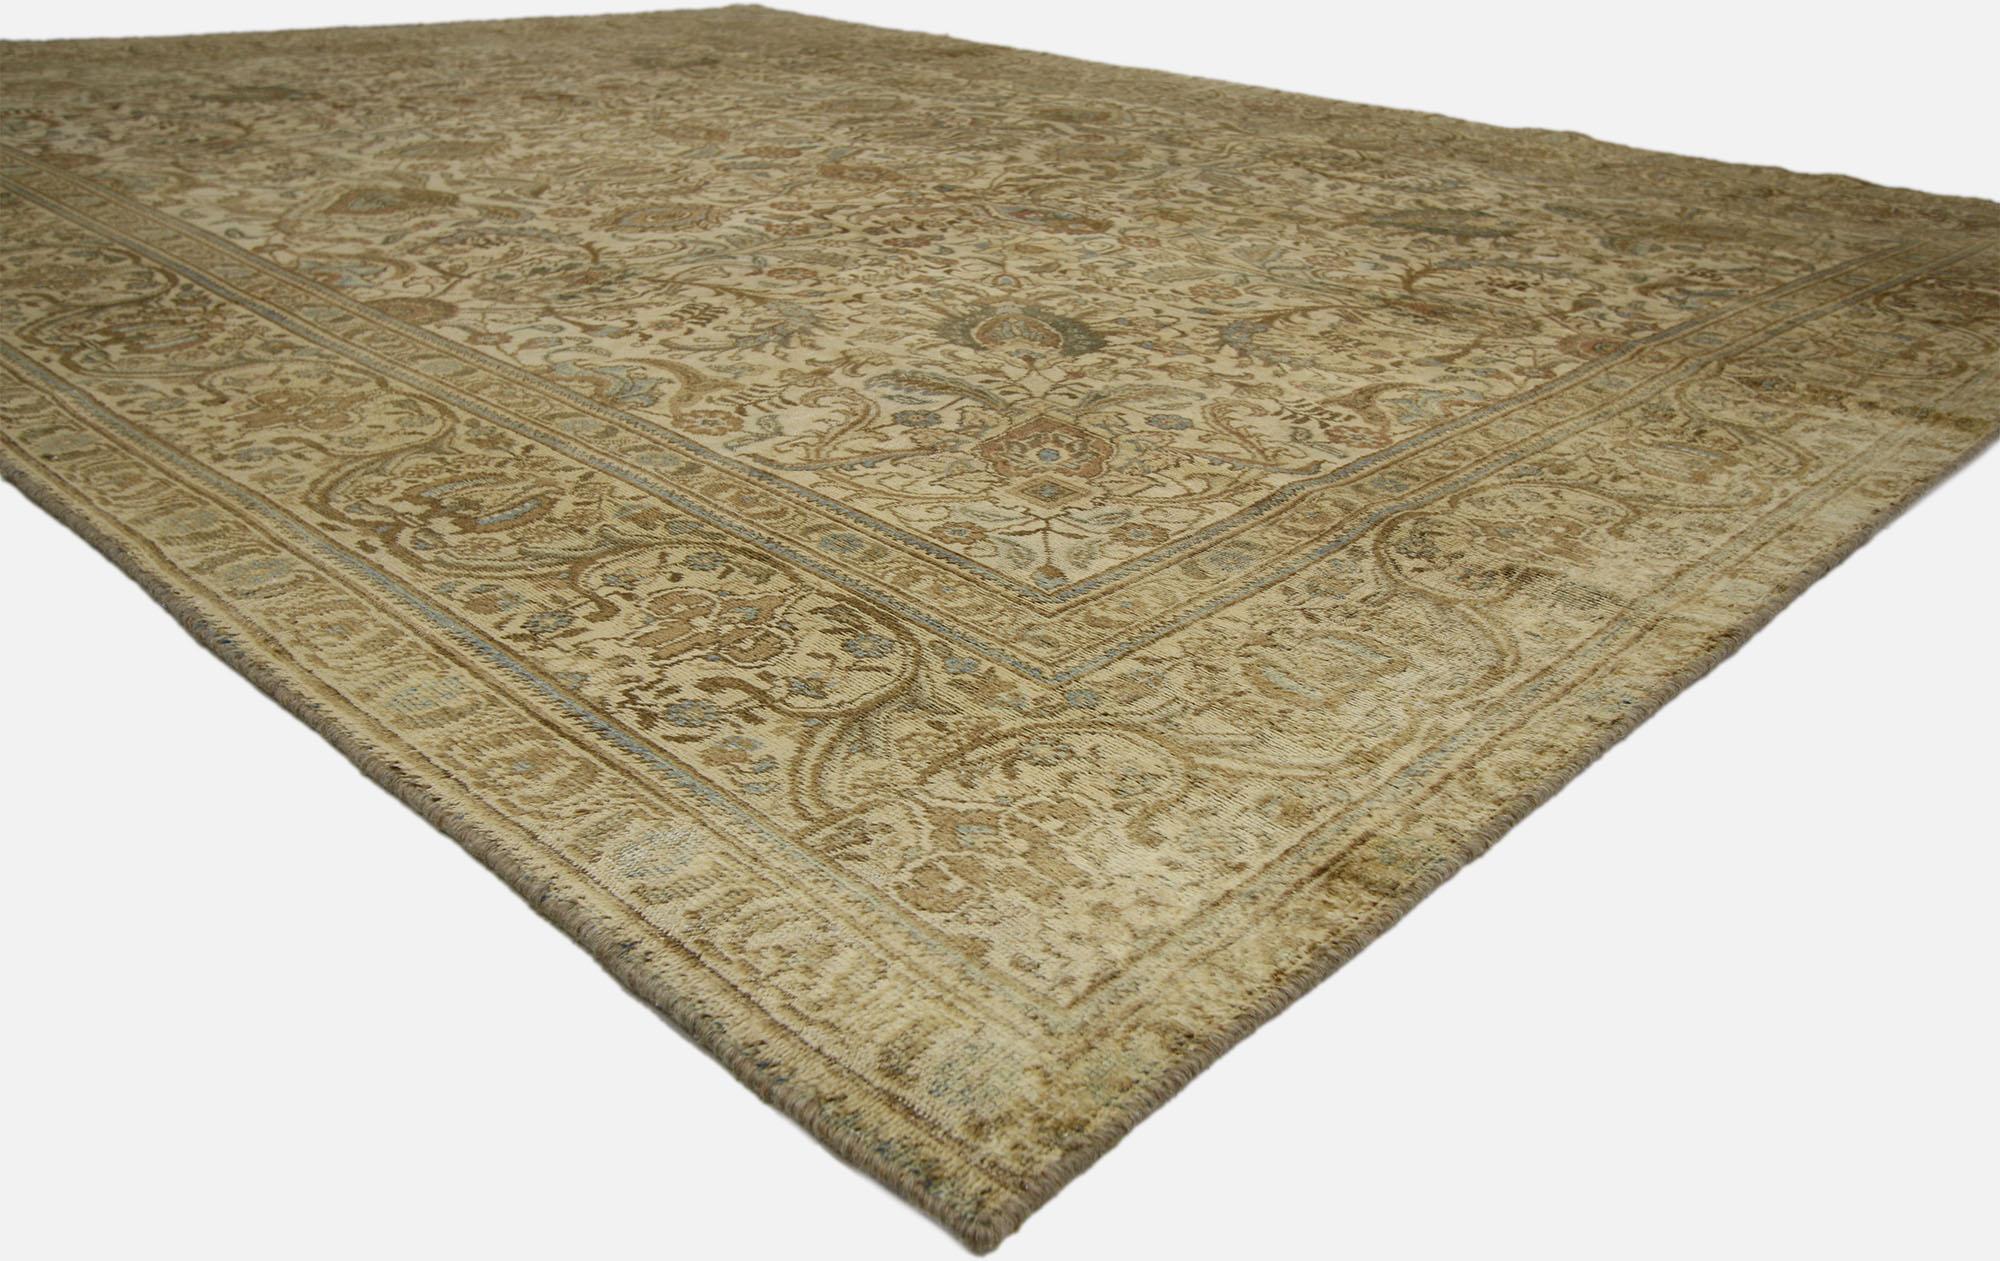 60728, distressed vintage Tabriz rug with warm, neutral colors. A beautiful bounty of Herati, acanthus leaves, florals, blooming palmettes, and peonies fill the center field of this distressed vintage Tabriz Persian rug. Decadence and nature's